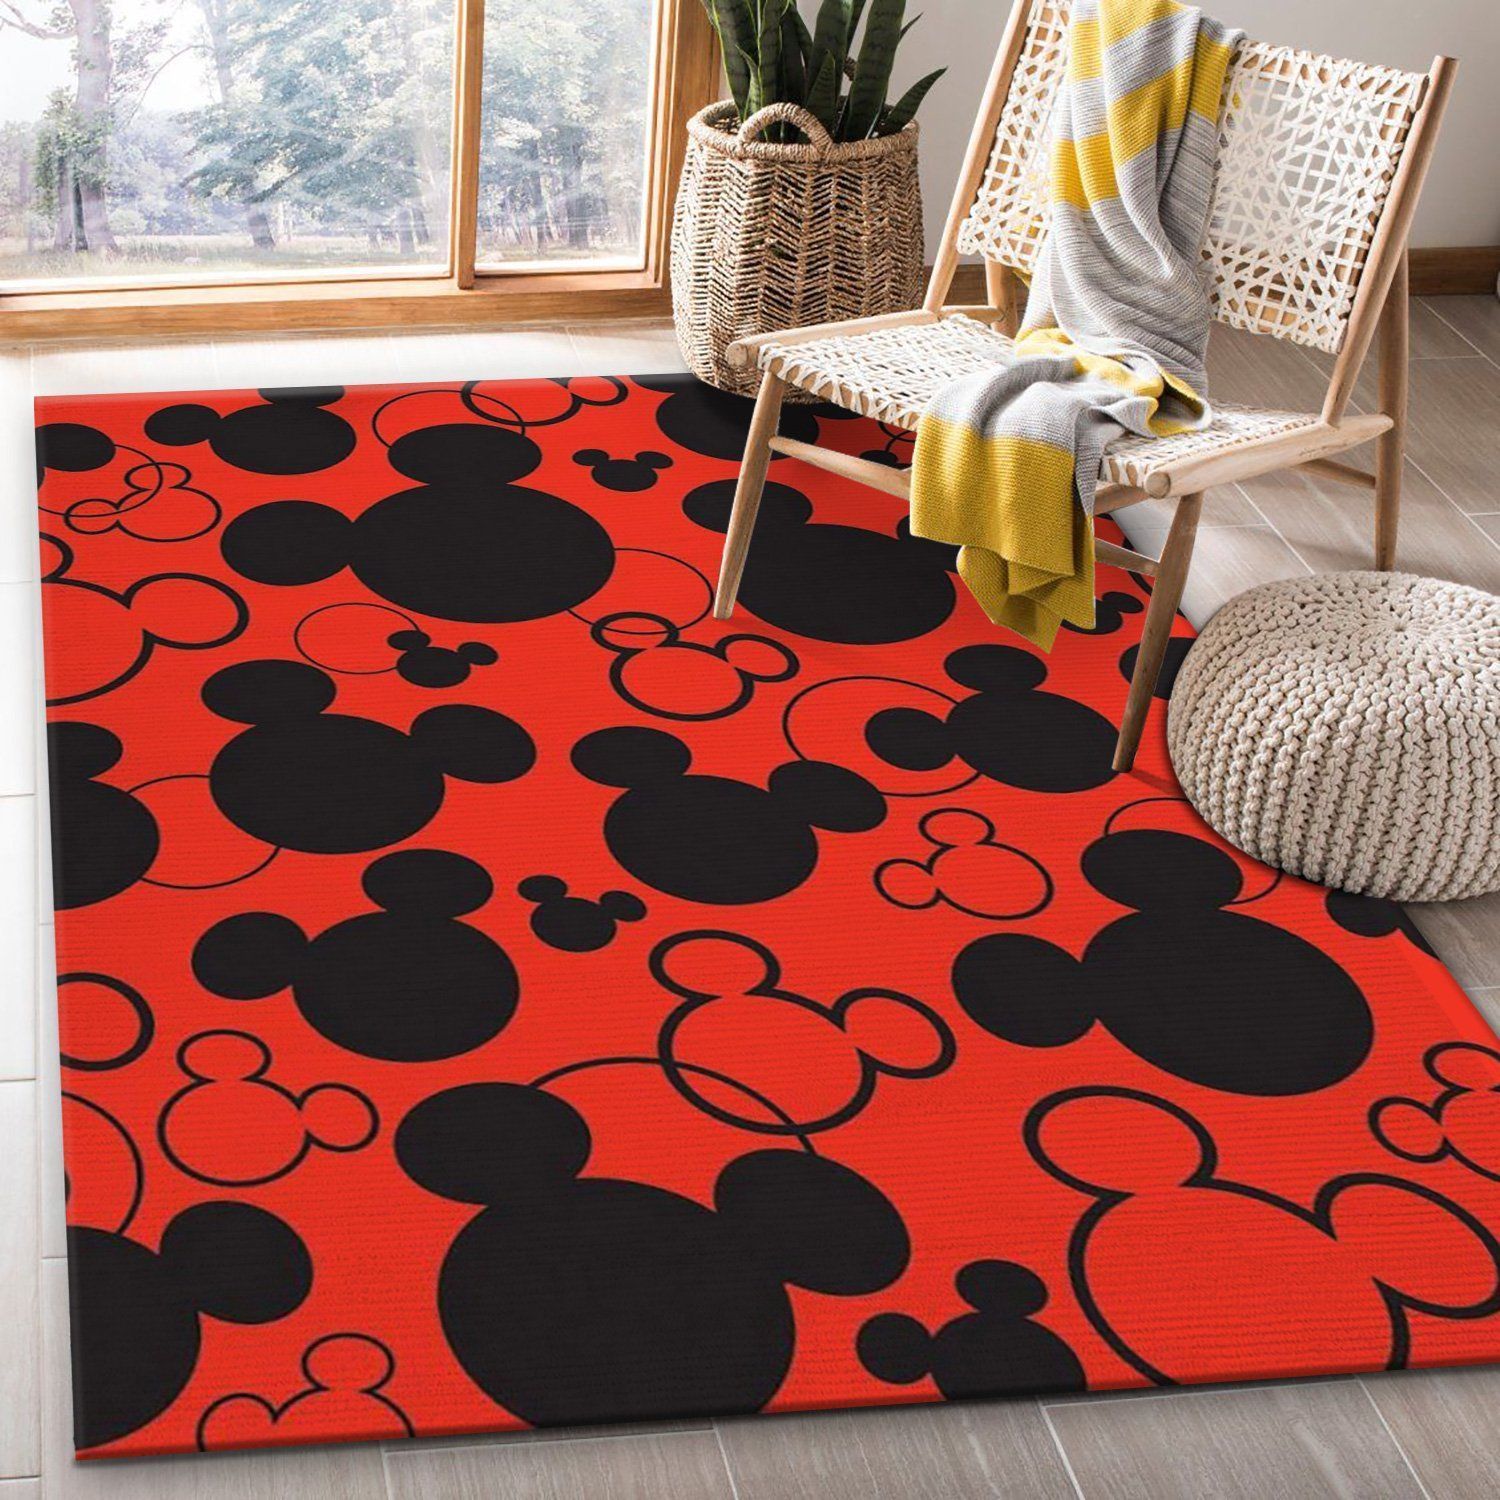 MICKEY MOUSE HIGH DEFINITION DISNEY AREA RUG KITCHEN RUG FAMILY GIFT US DECOR 180222